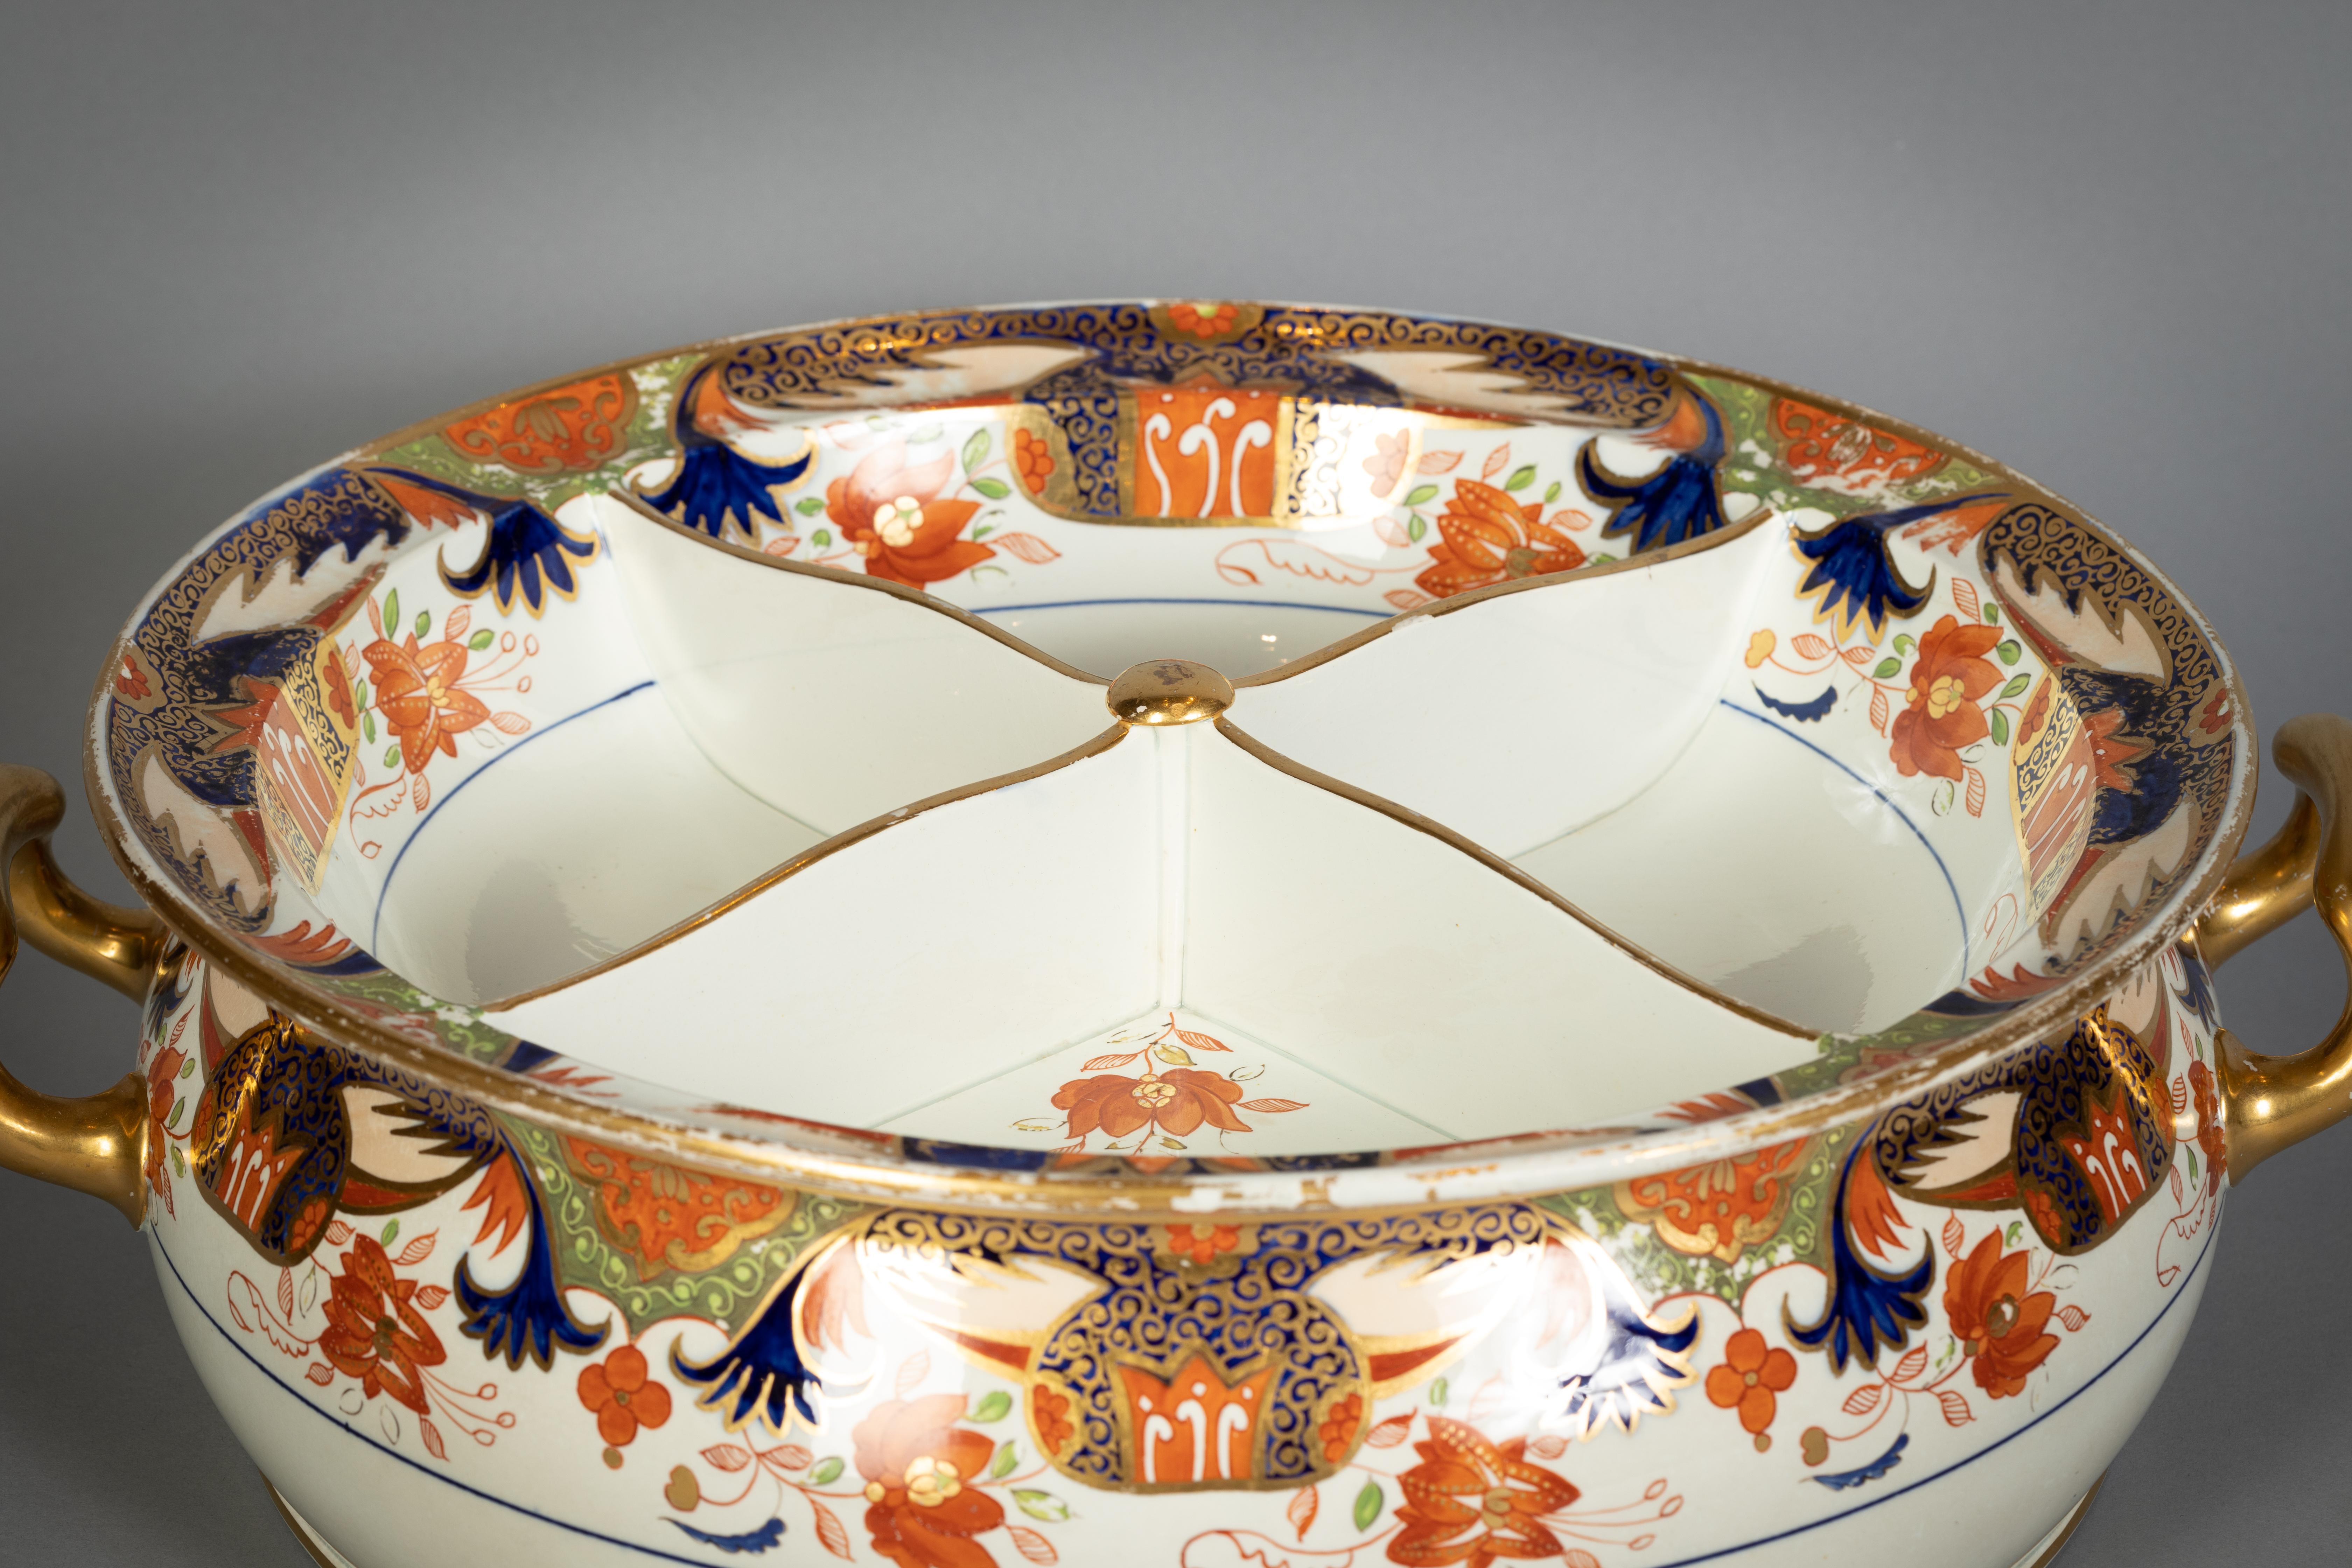 English Porcelain Palatial Tureen, Wedgwood, circa 1820 In Good Condition For Sale In New York, NY